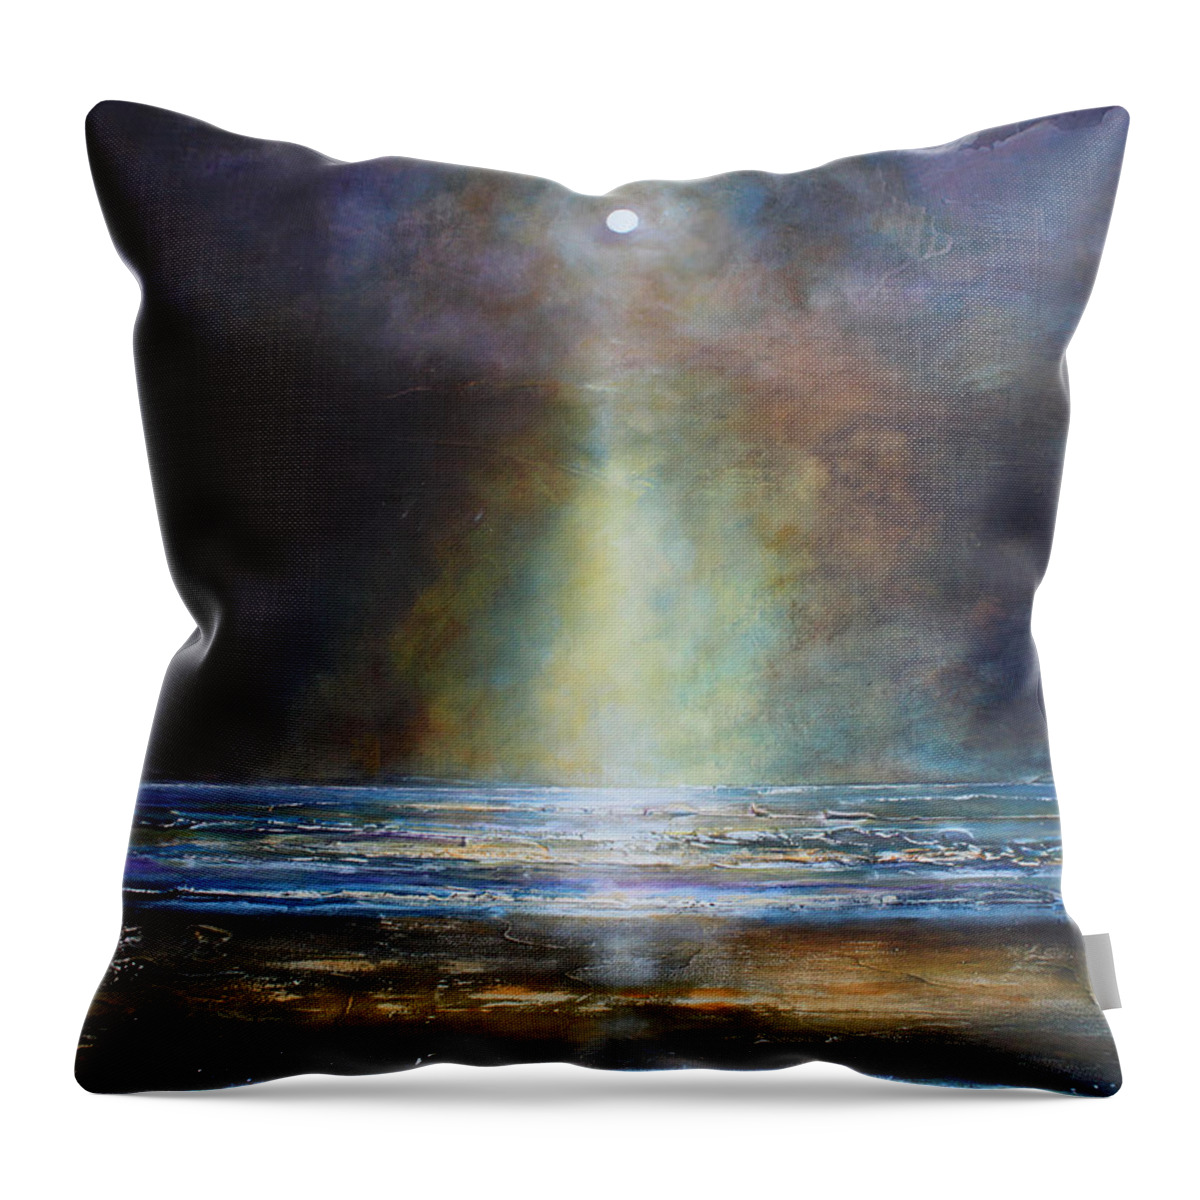 Abstract Wall Art Throw Pillow featuring the painting Salvation Beach by Toni Grote